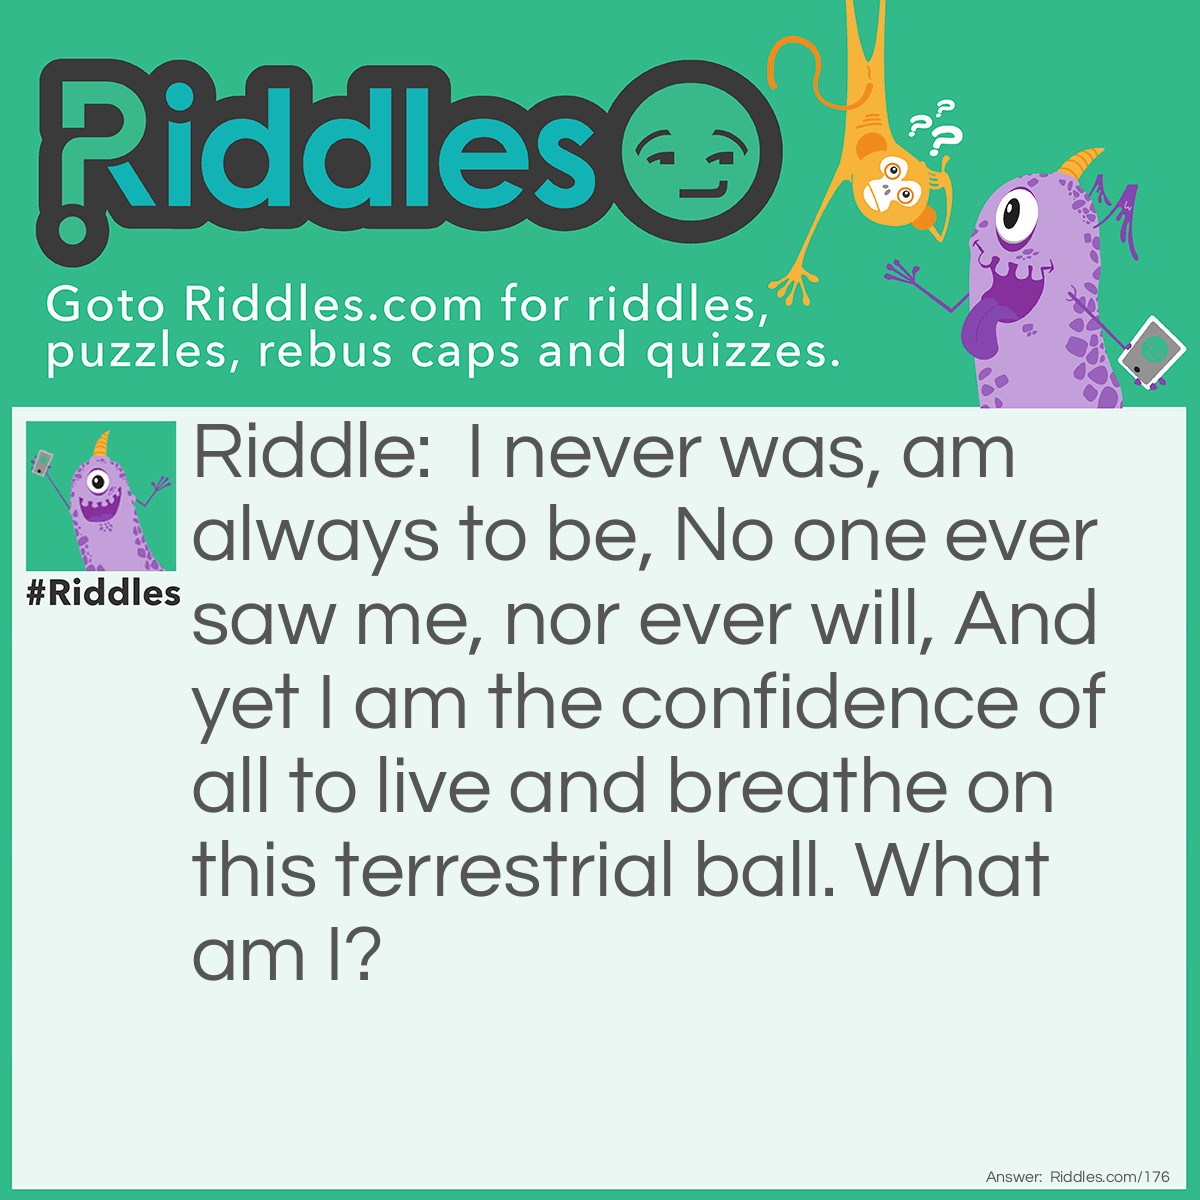 Riddle: I never was, am always to be, No one ever saw me, nor ever will, And yet I am the confidence of all to live and breathe on this terrestrial ball. <a href="https://www.riddles.com/what-am-i-riddles">What am I</a>? Answer: Tomorrow.